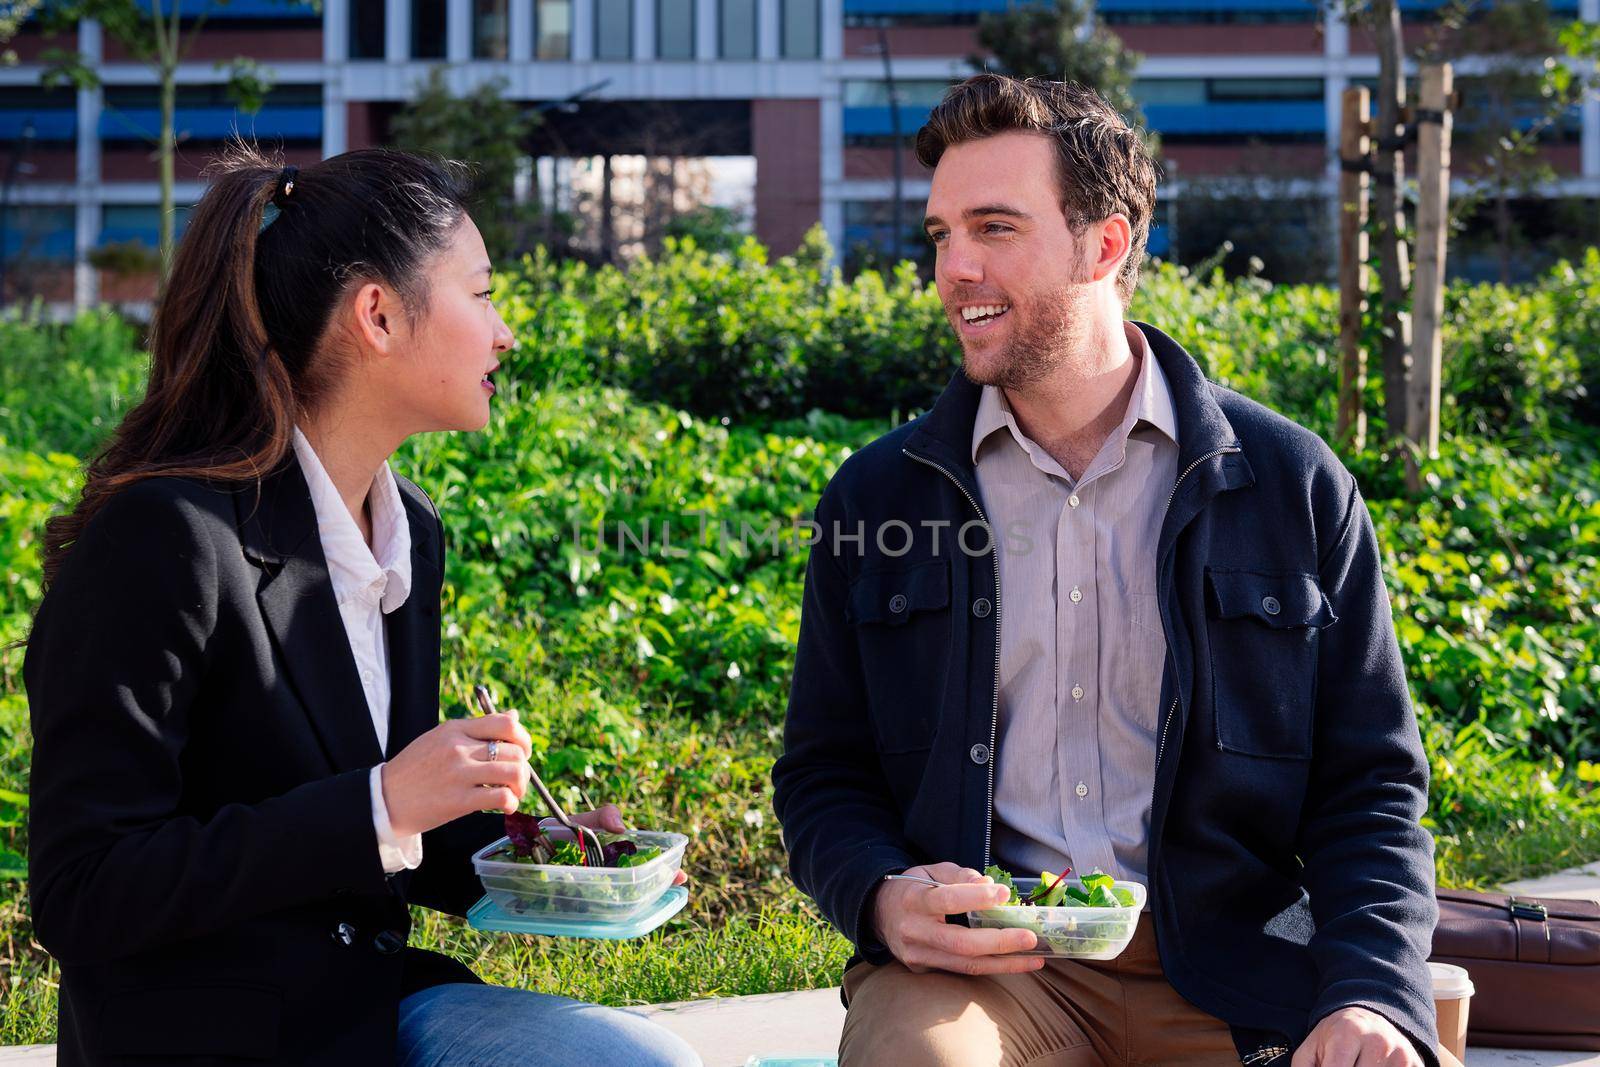 coworkers chatting and eating a salad during a work break in the park next to the office, concept of healthy fast food at work